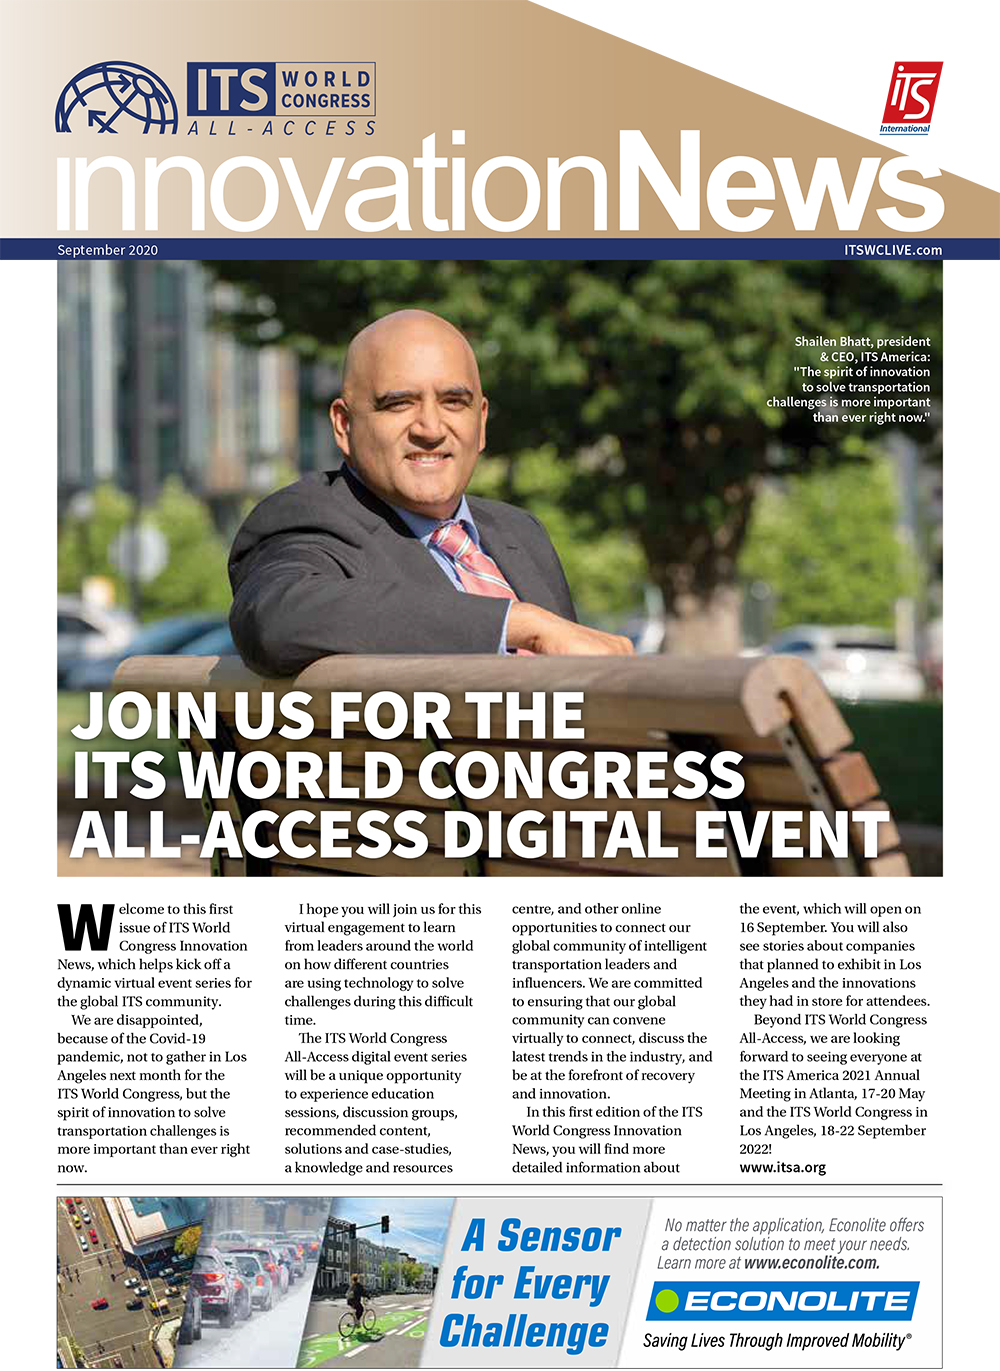 ITSWC All Access issue1